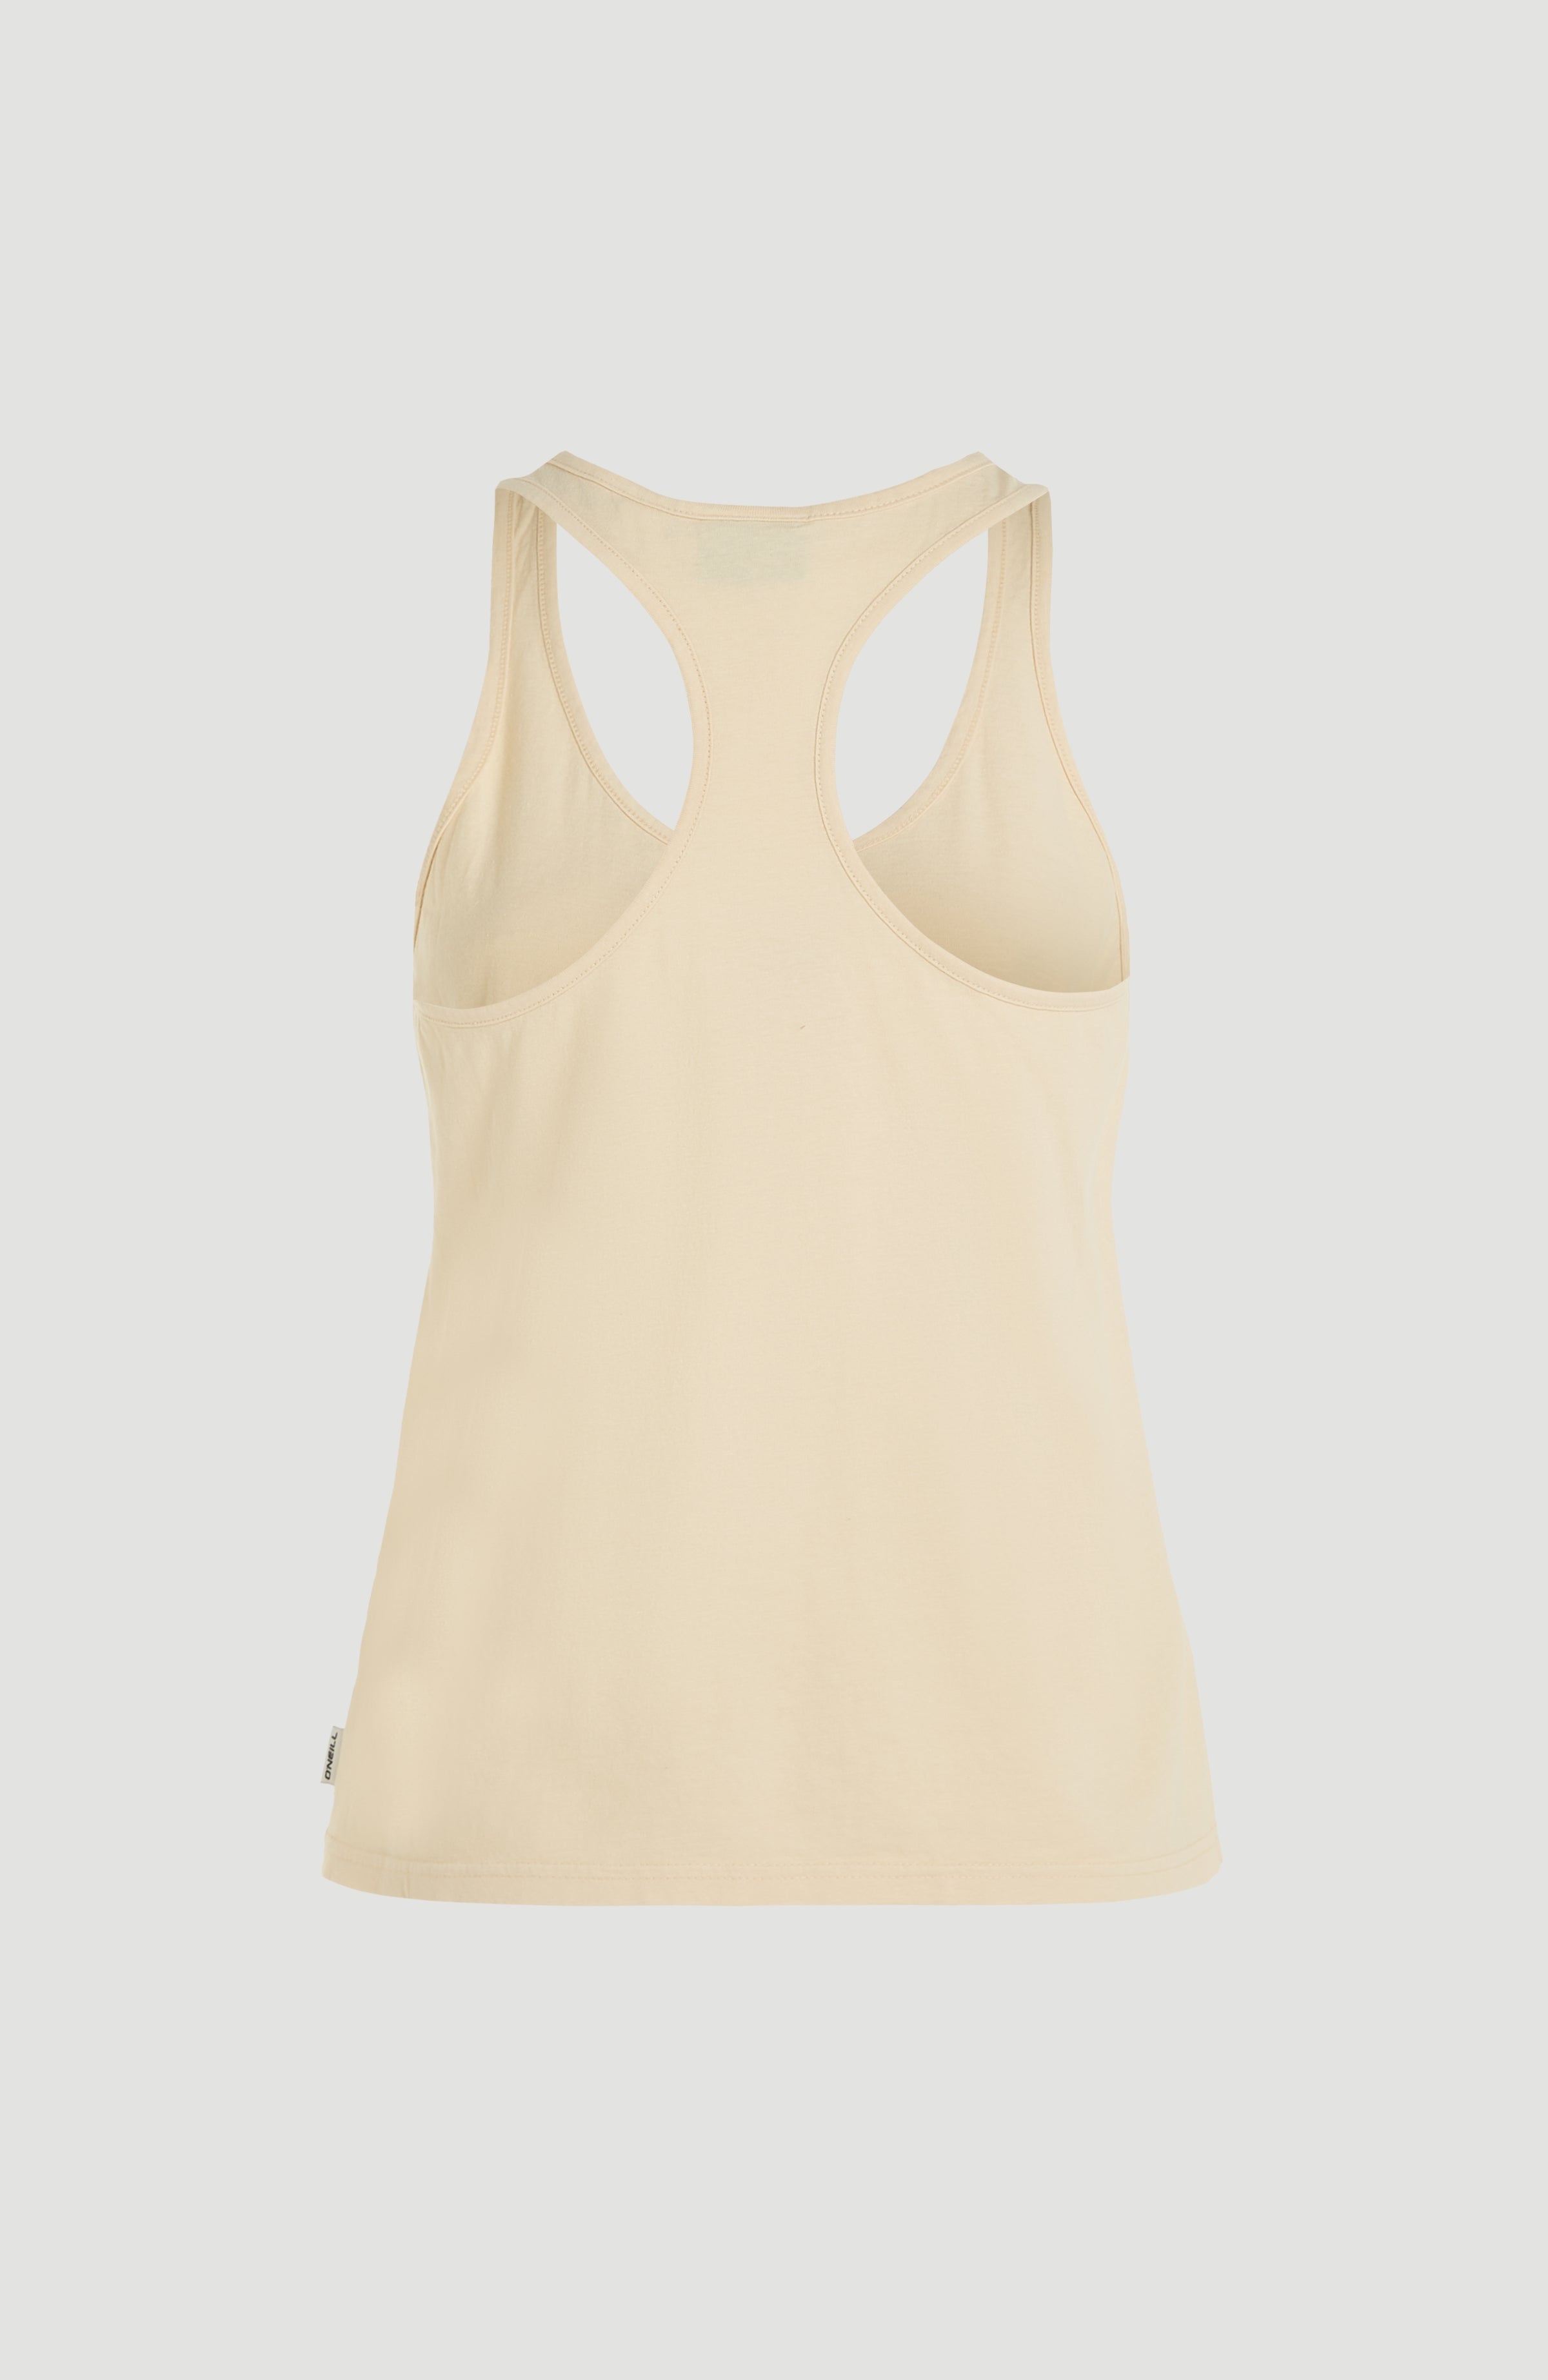 Connective Graphic Tanktop | Bleached Sand – O'Neill